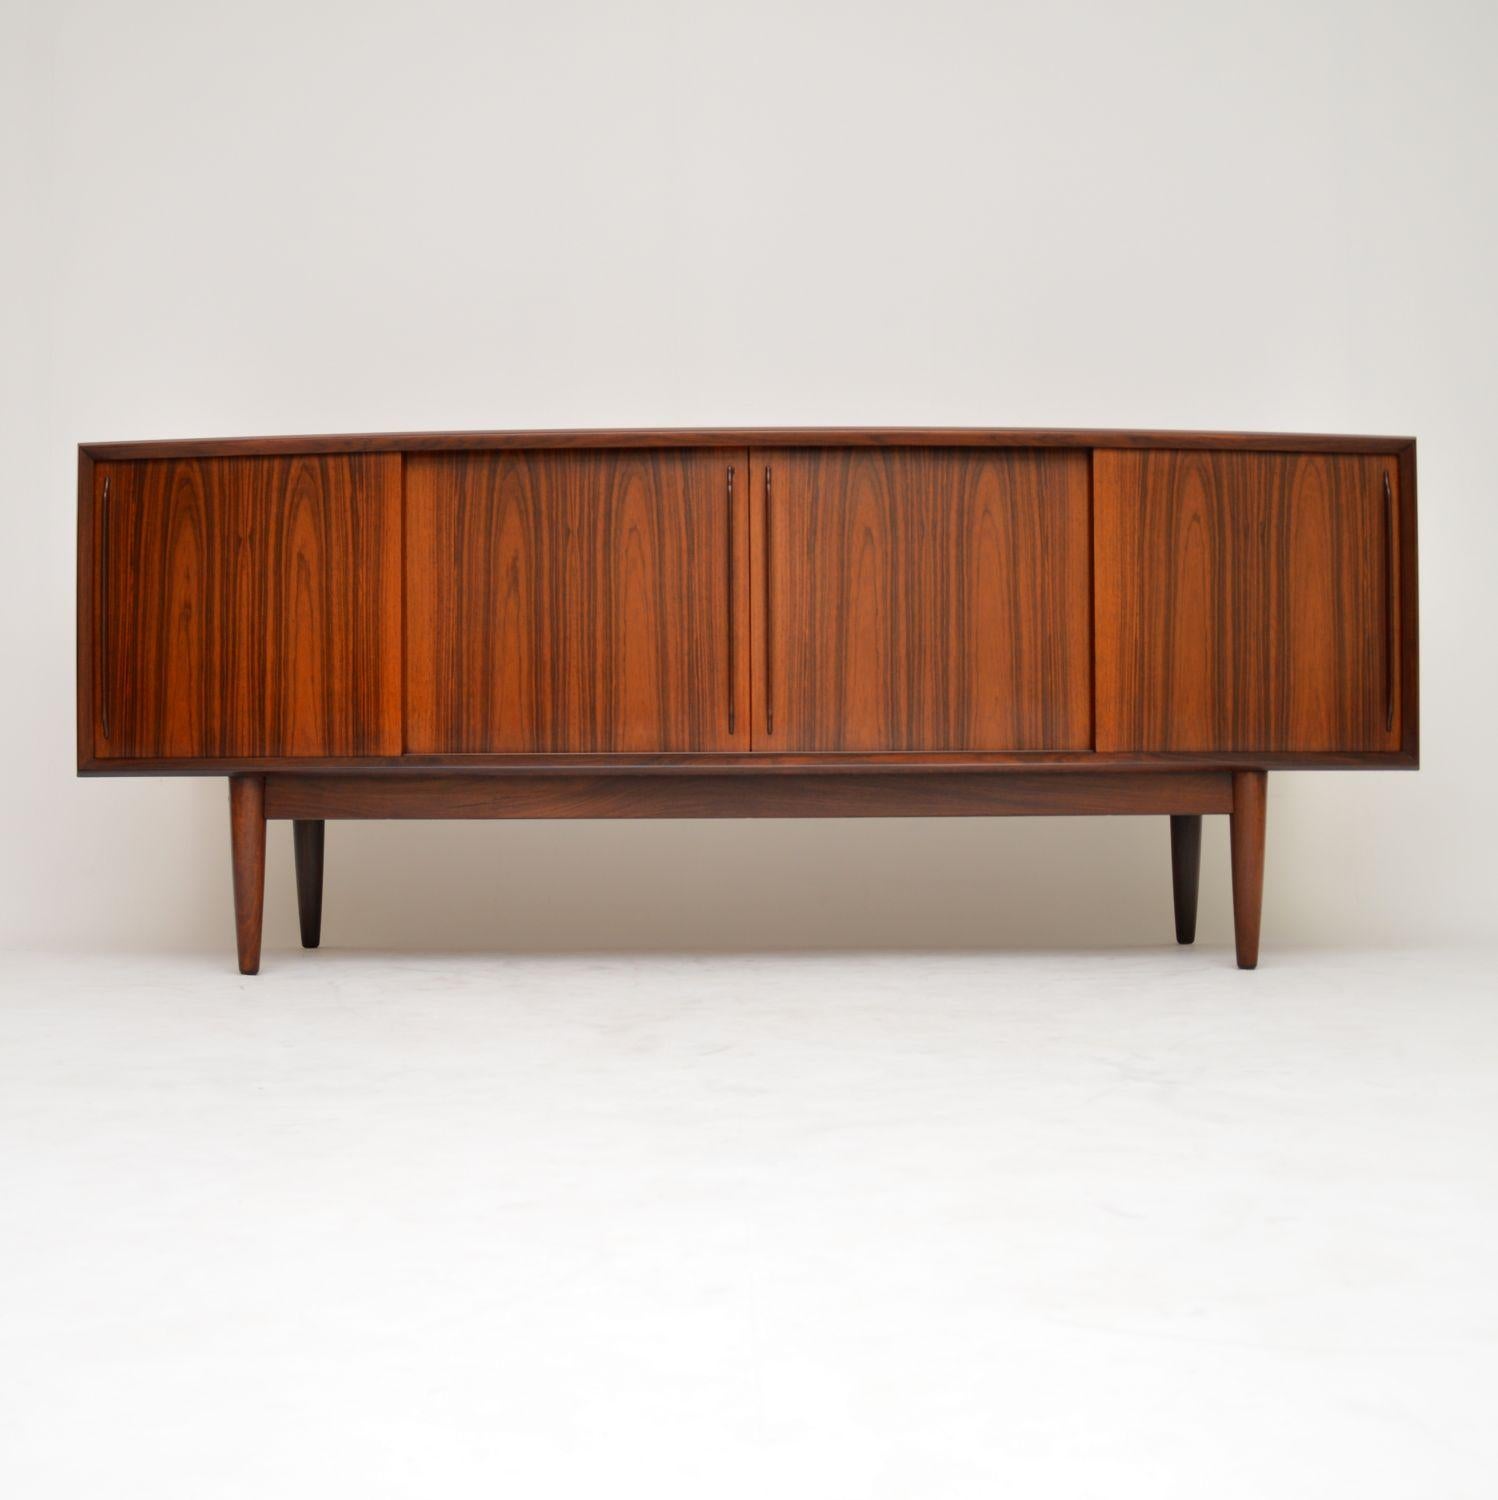 A superb and very rare vintage Danish sideboard, this was designed by Arne Vodder, it was made by HP Hansen in the 1960s. The quality is amazing, it’s unusual to see a bowed front like this. There is lots of storage space including felt lined tray